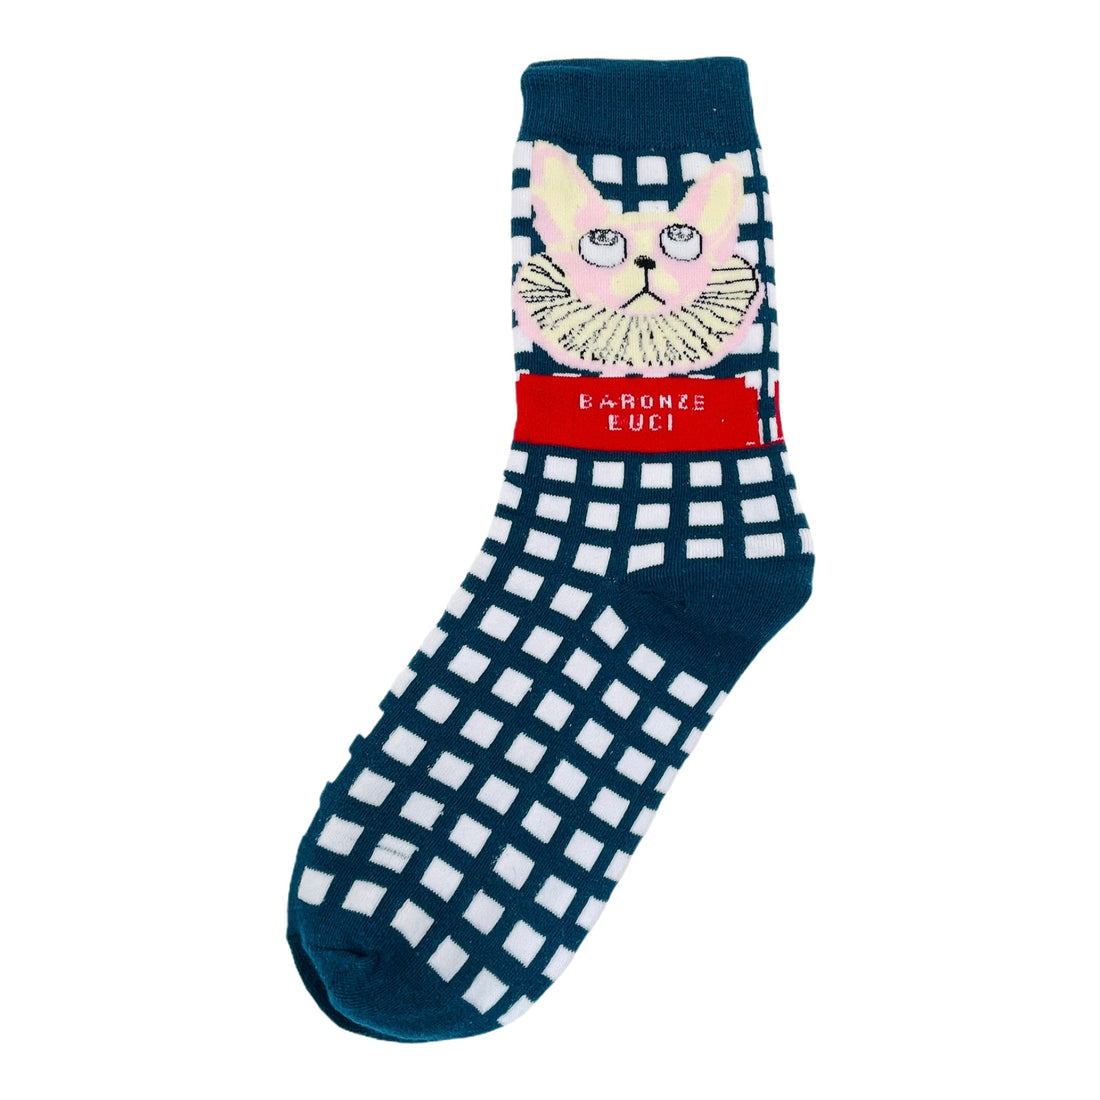 Navy check socks with King cat graphic